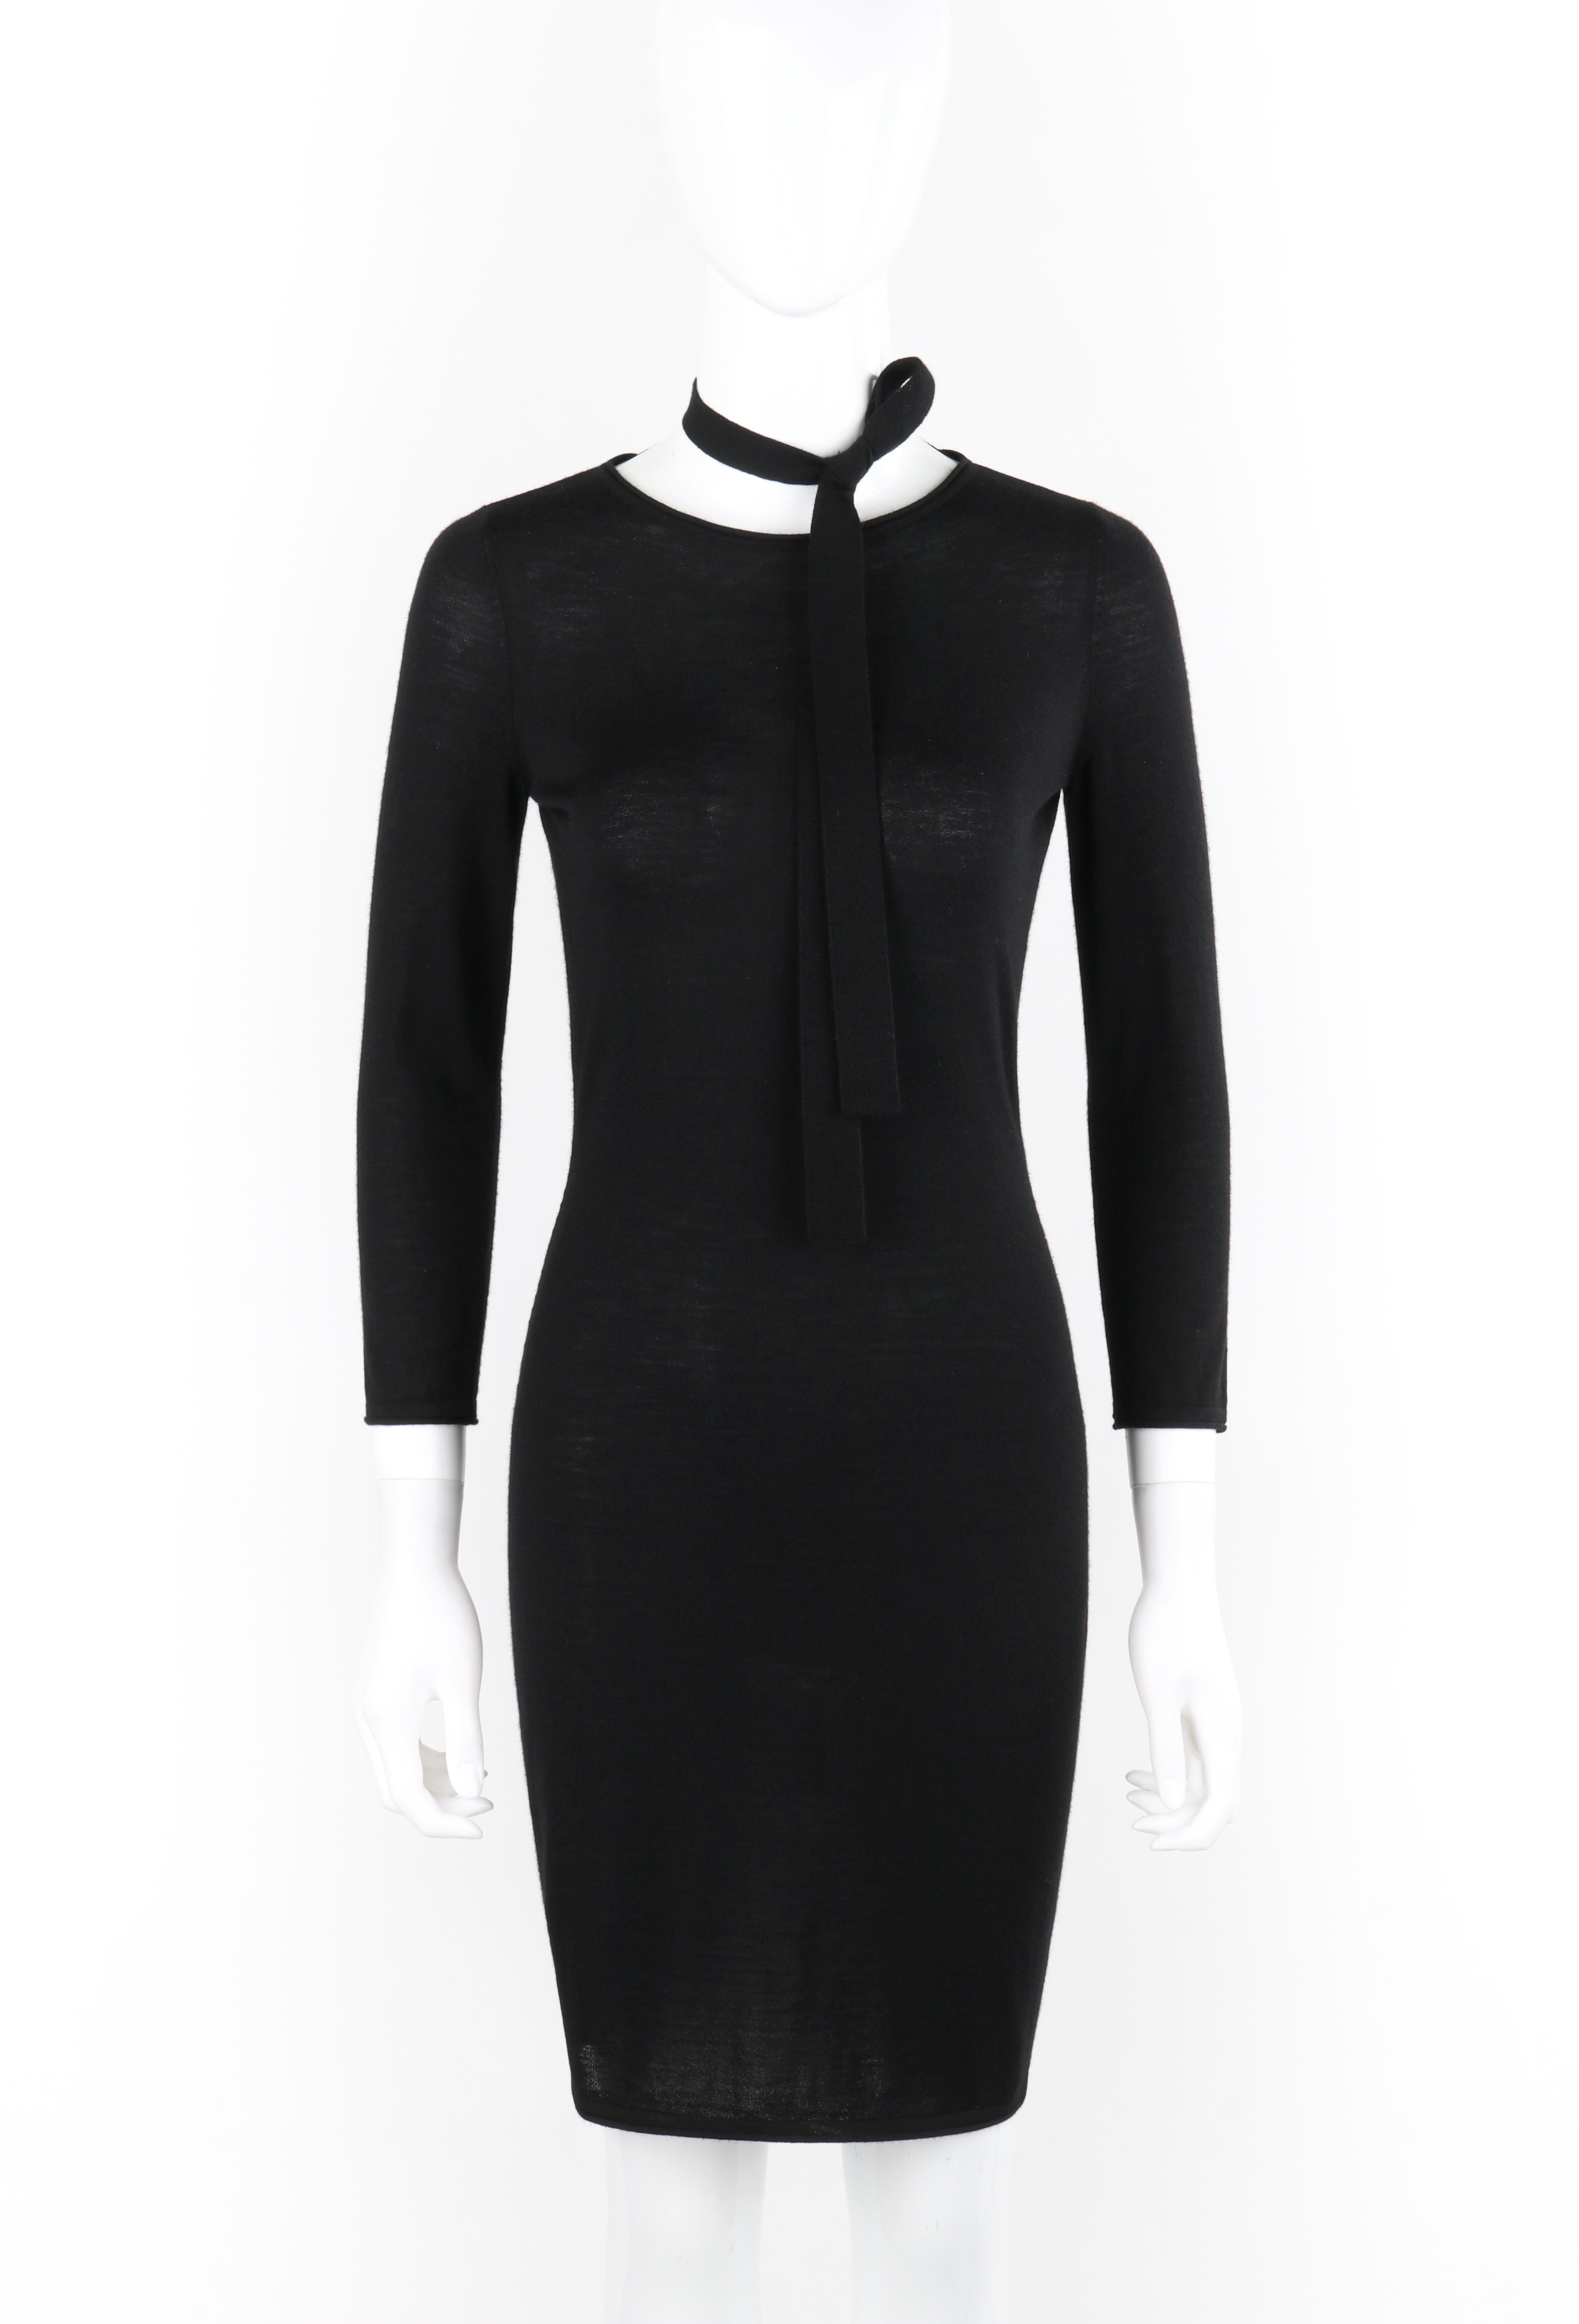 ALEXANDER McQueen F/W 2004 Black Knit Draped Open Back Tie Long Sleeve Dress

Marque / Fabricant : Alexander McQueen
Collectional : F/W 2004 